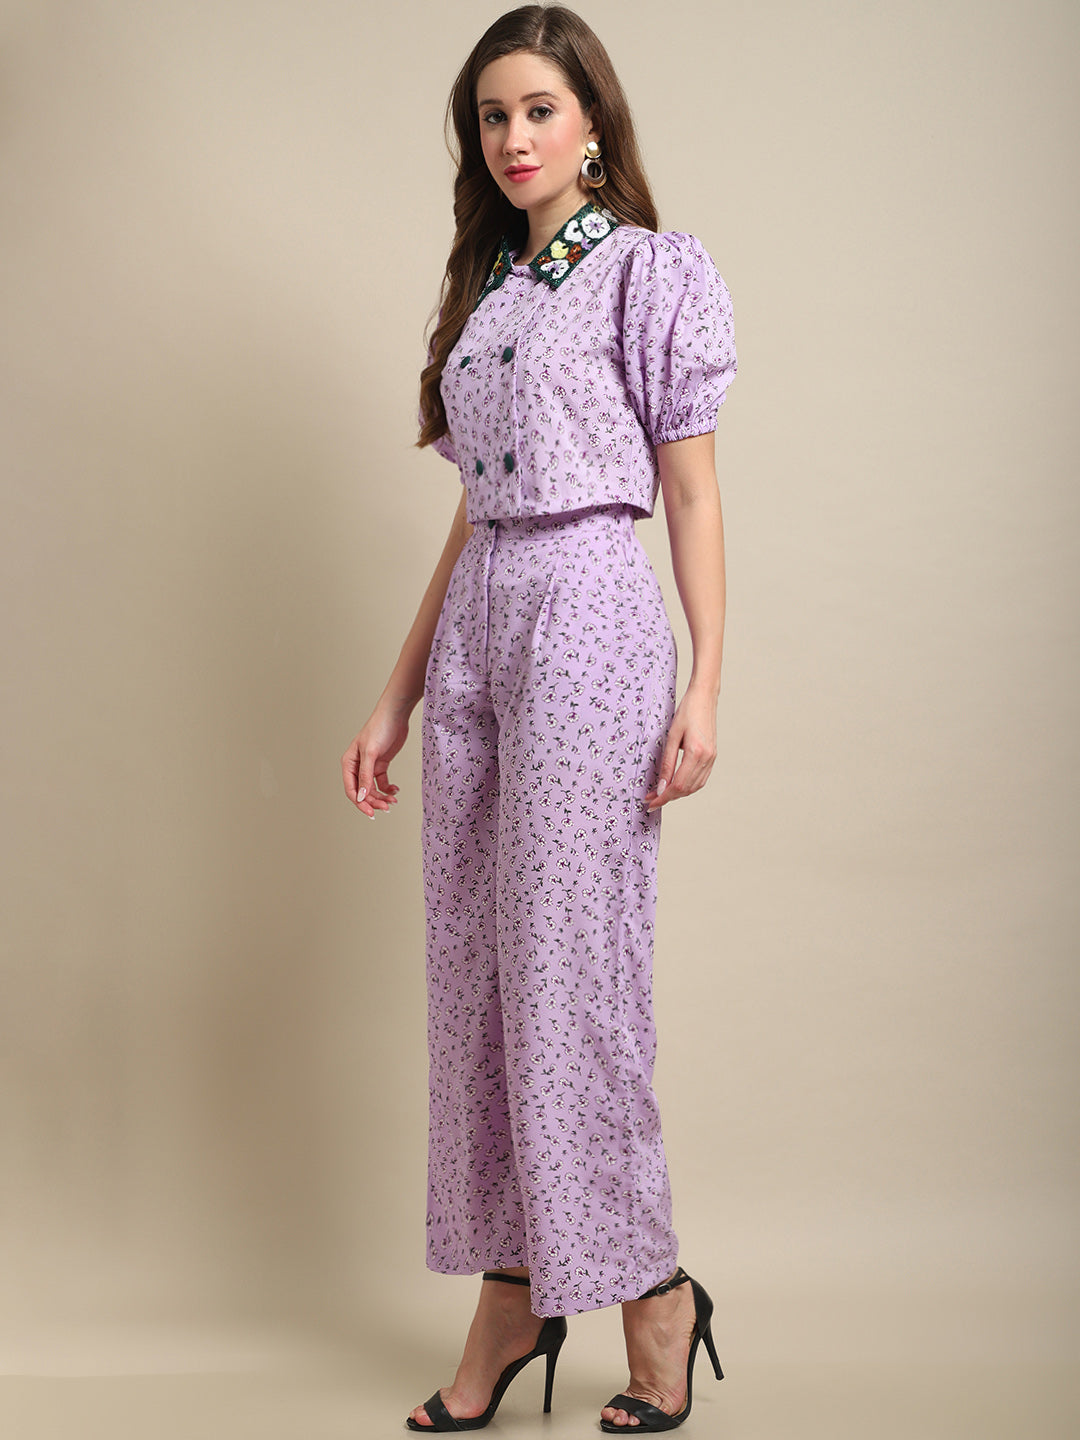 Blanc9 Embellished Collar Top With Purple Printed Co-Ord Set